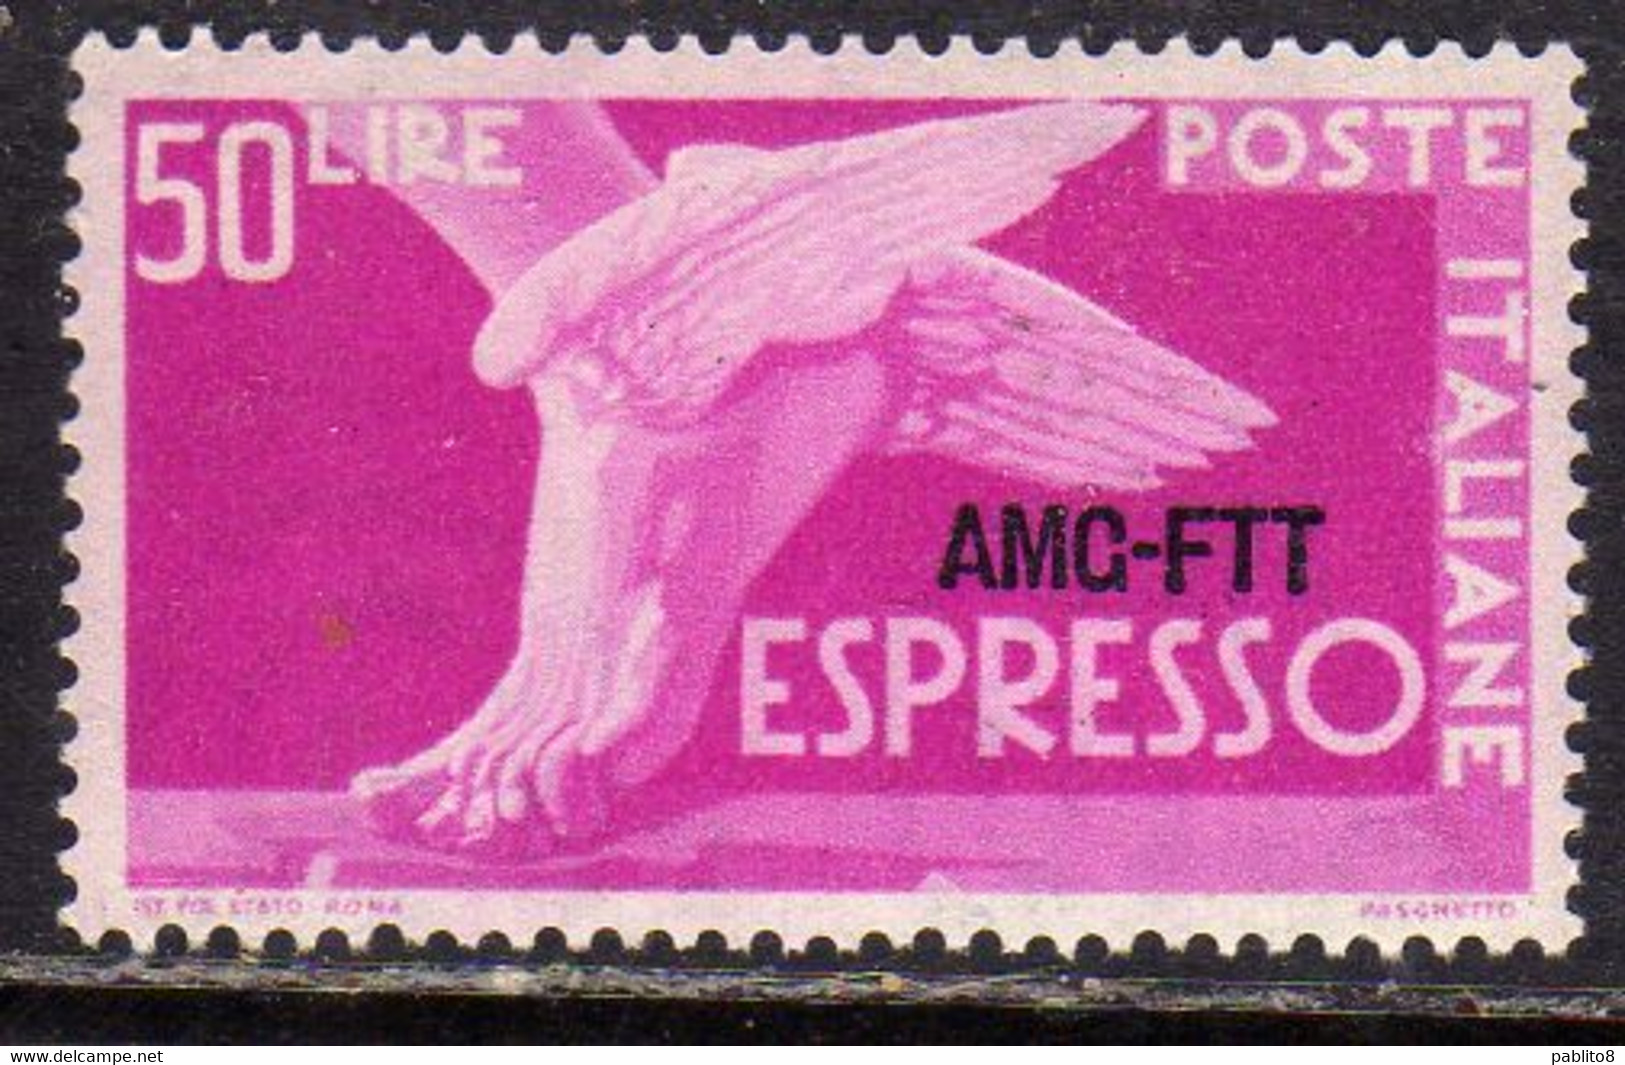 TRIESTE A 1953 AMG-FTT OVERPRINTED ESPRESSO SPECIAL DELIVERY LIRE 50 RUOTA III MNH BEN CENTRATO - Express Mail